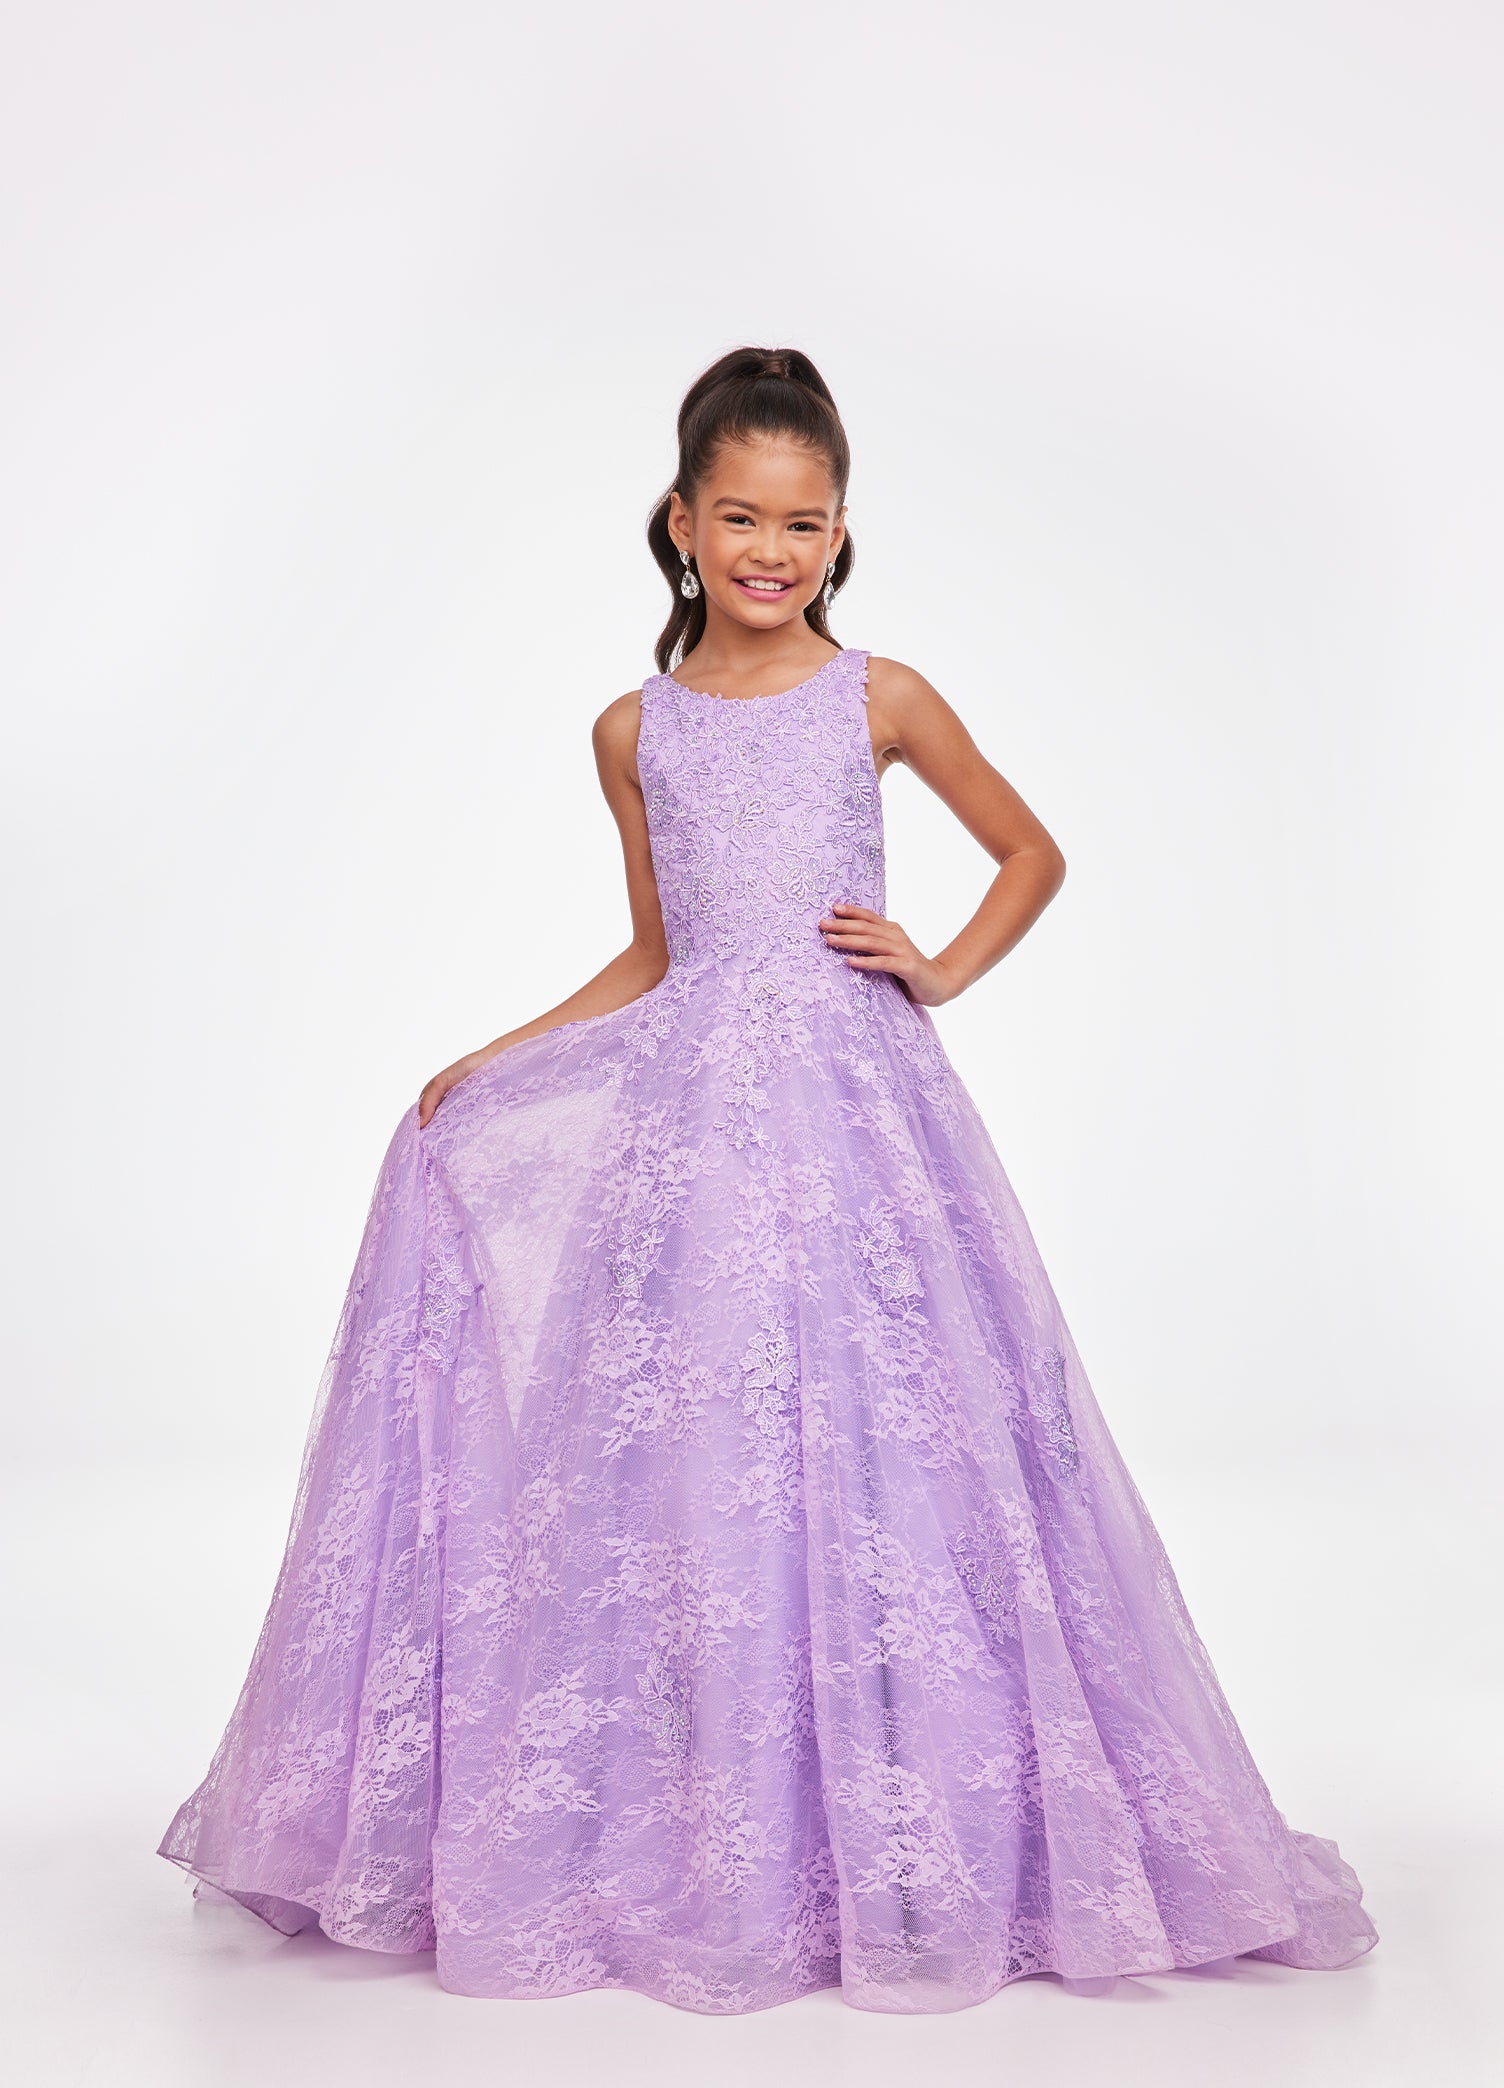 Ashley Lauren Kids 8073 Girls Long Lace A Line Ball Gown Pageant Dress High Neck Lovely lace gown featuring a crew neckline embellished with lace applique and AB stones throughout the bodice and skirt. Crew Neckline Lace Applique A-Line Available Sizes: 4-16 Available Colors: Aqua, Lilac